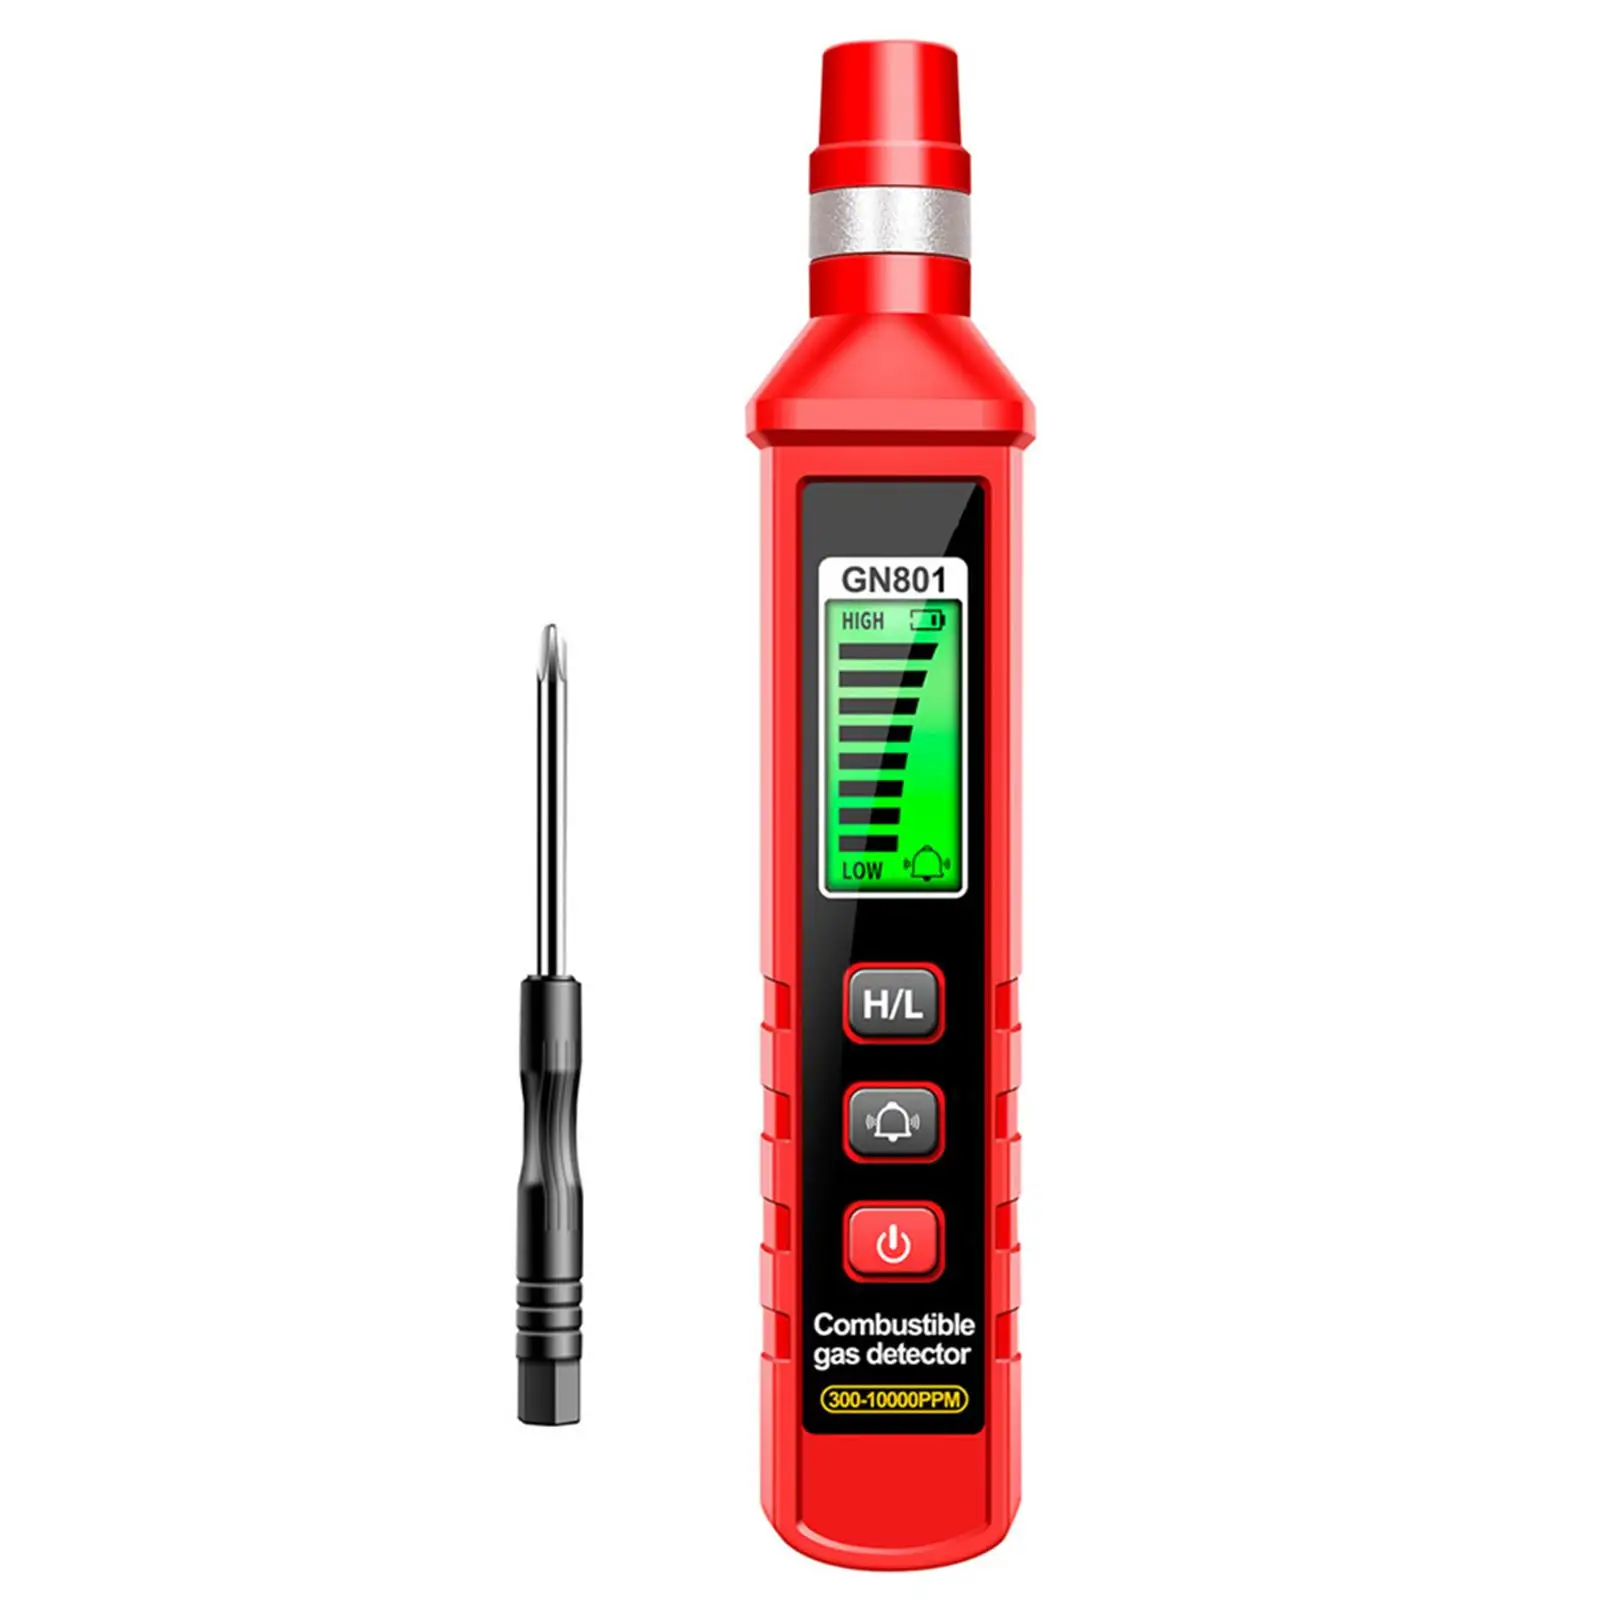 Portable Gas Sniffer Adjustable Sensitivity with Audible and Visual Alarm High Precision Auto Off Gas Leak Tester for Home RV